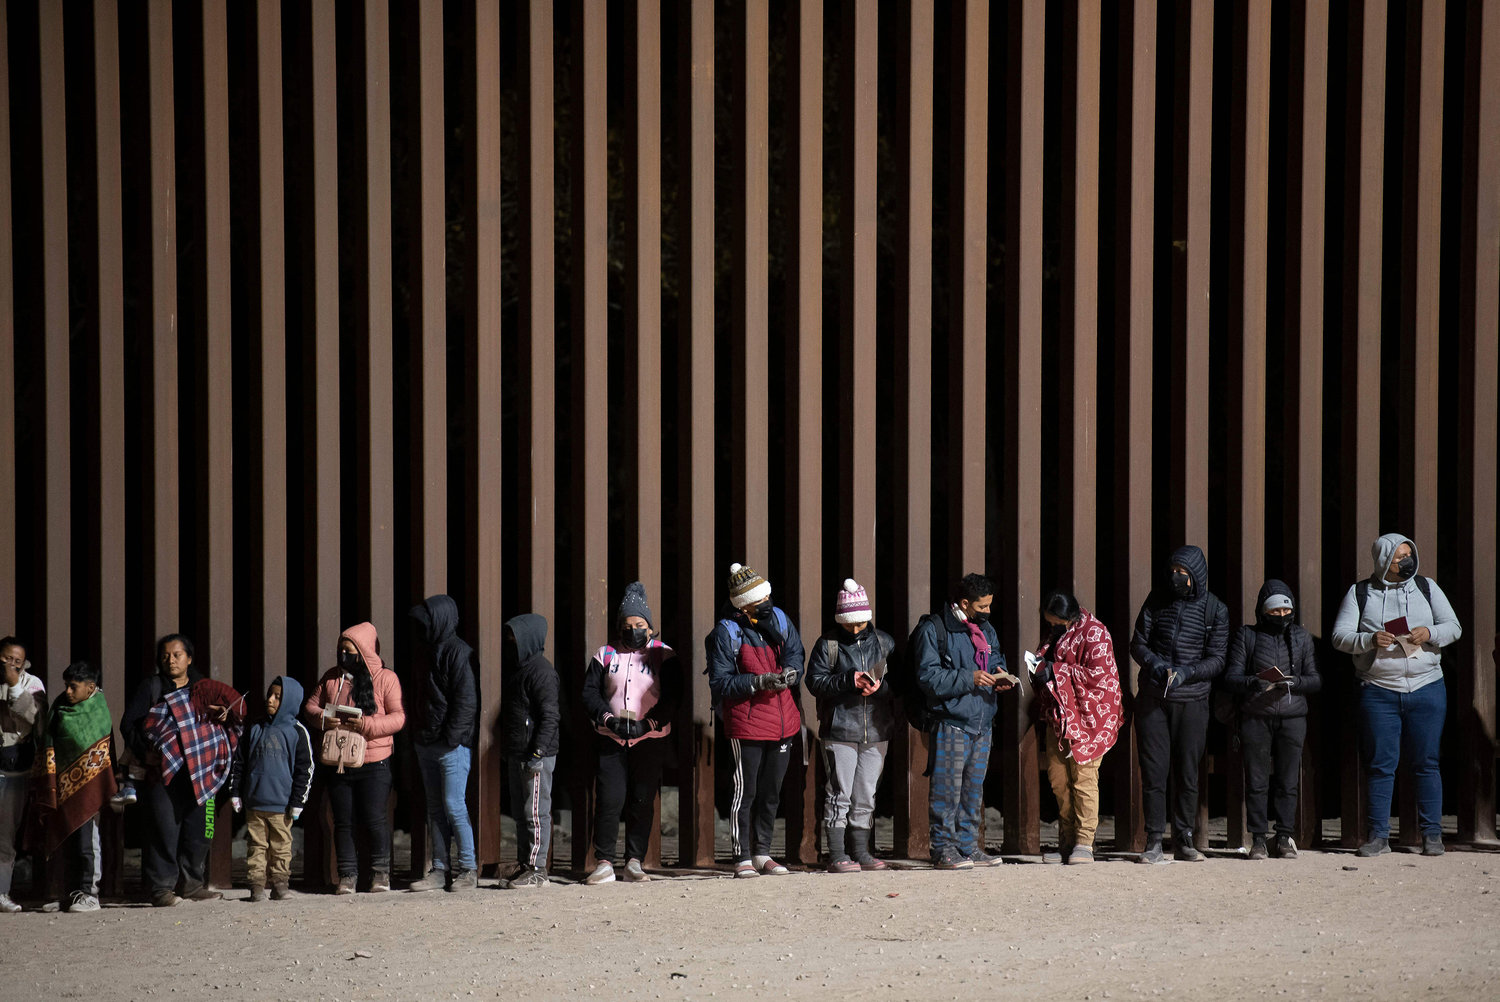 Asylum-seekers line up to be processed by U.S. Customs and Border Patrol agents at a gap in the US-Mexico border fence near Somerton, Arizona, on Dec. 26, 2022. (Rebecca Noble/AFP/Getty Images/TNS)